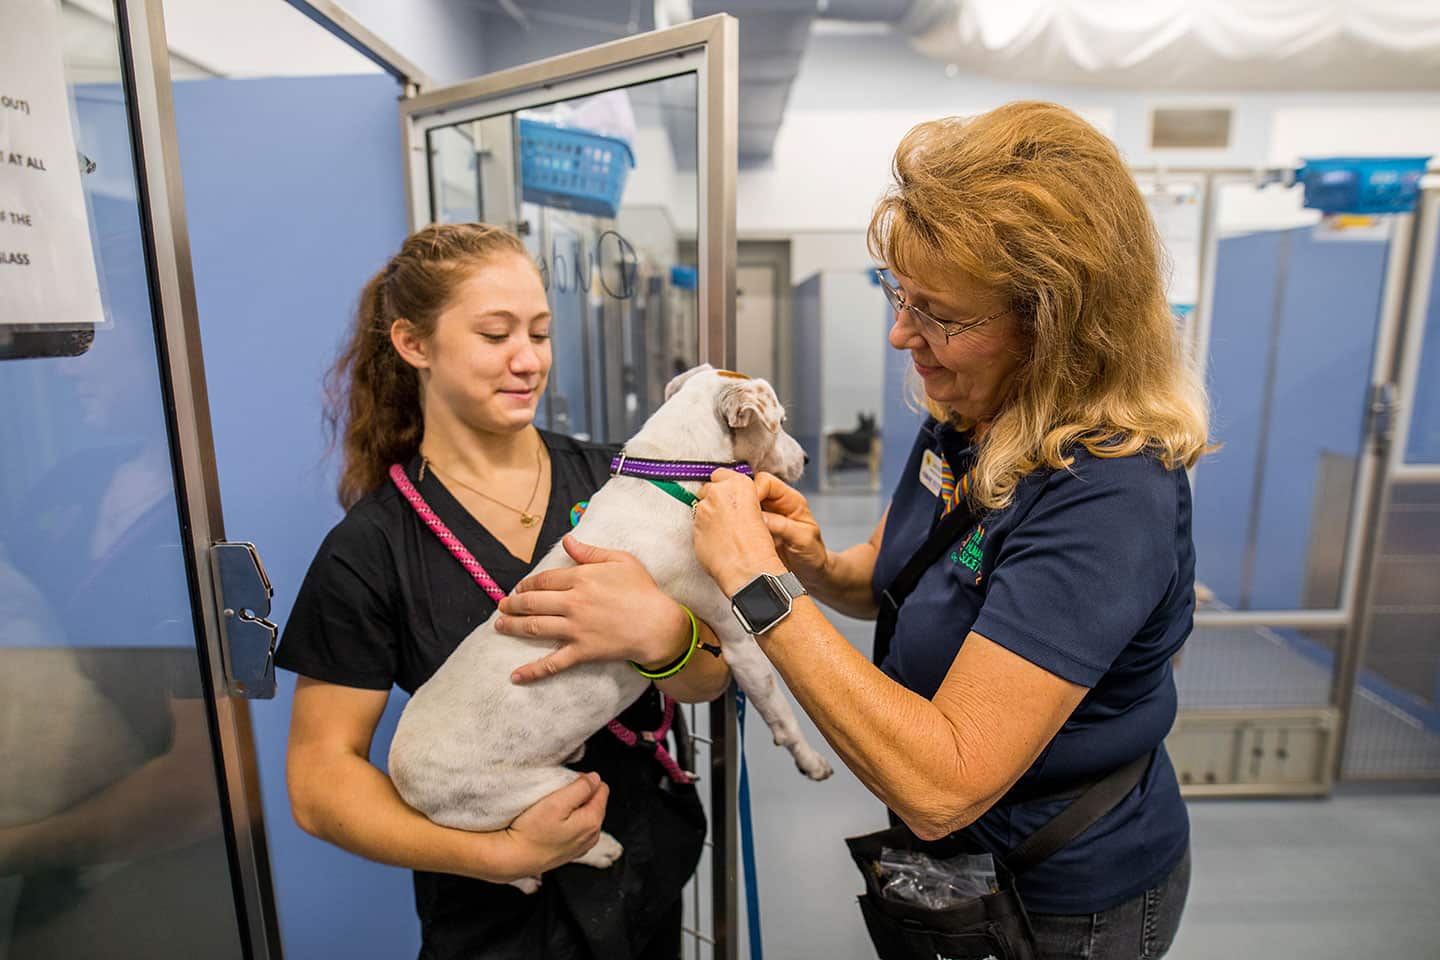 What skills can you gain from volunteering at an animal shelter?